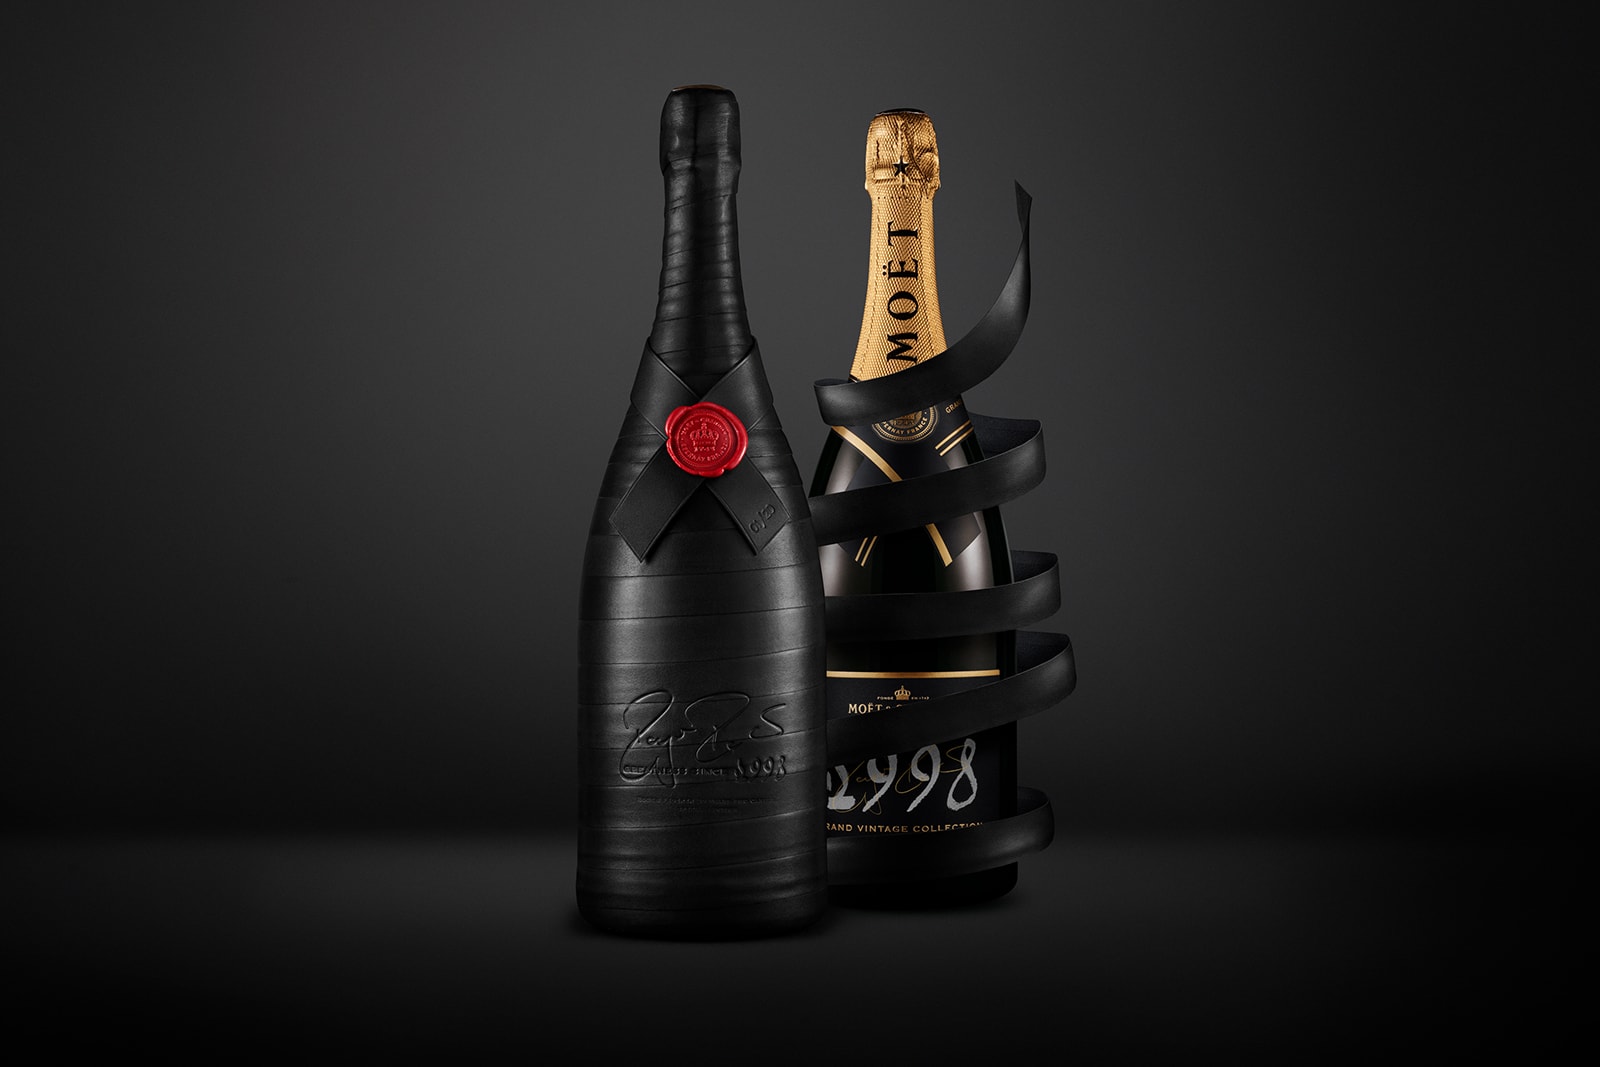 Moët & Chandon GREATNESS SINCE 1998 Collection roger federer exclusive limited edition champagne